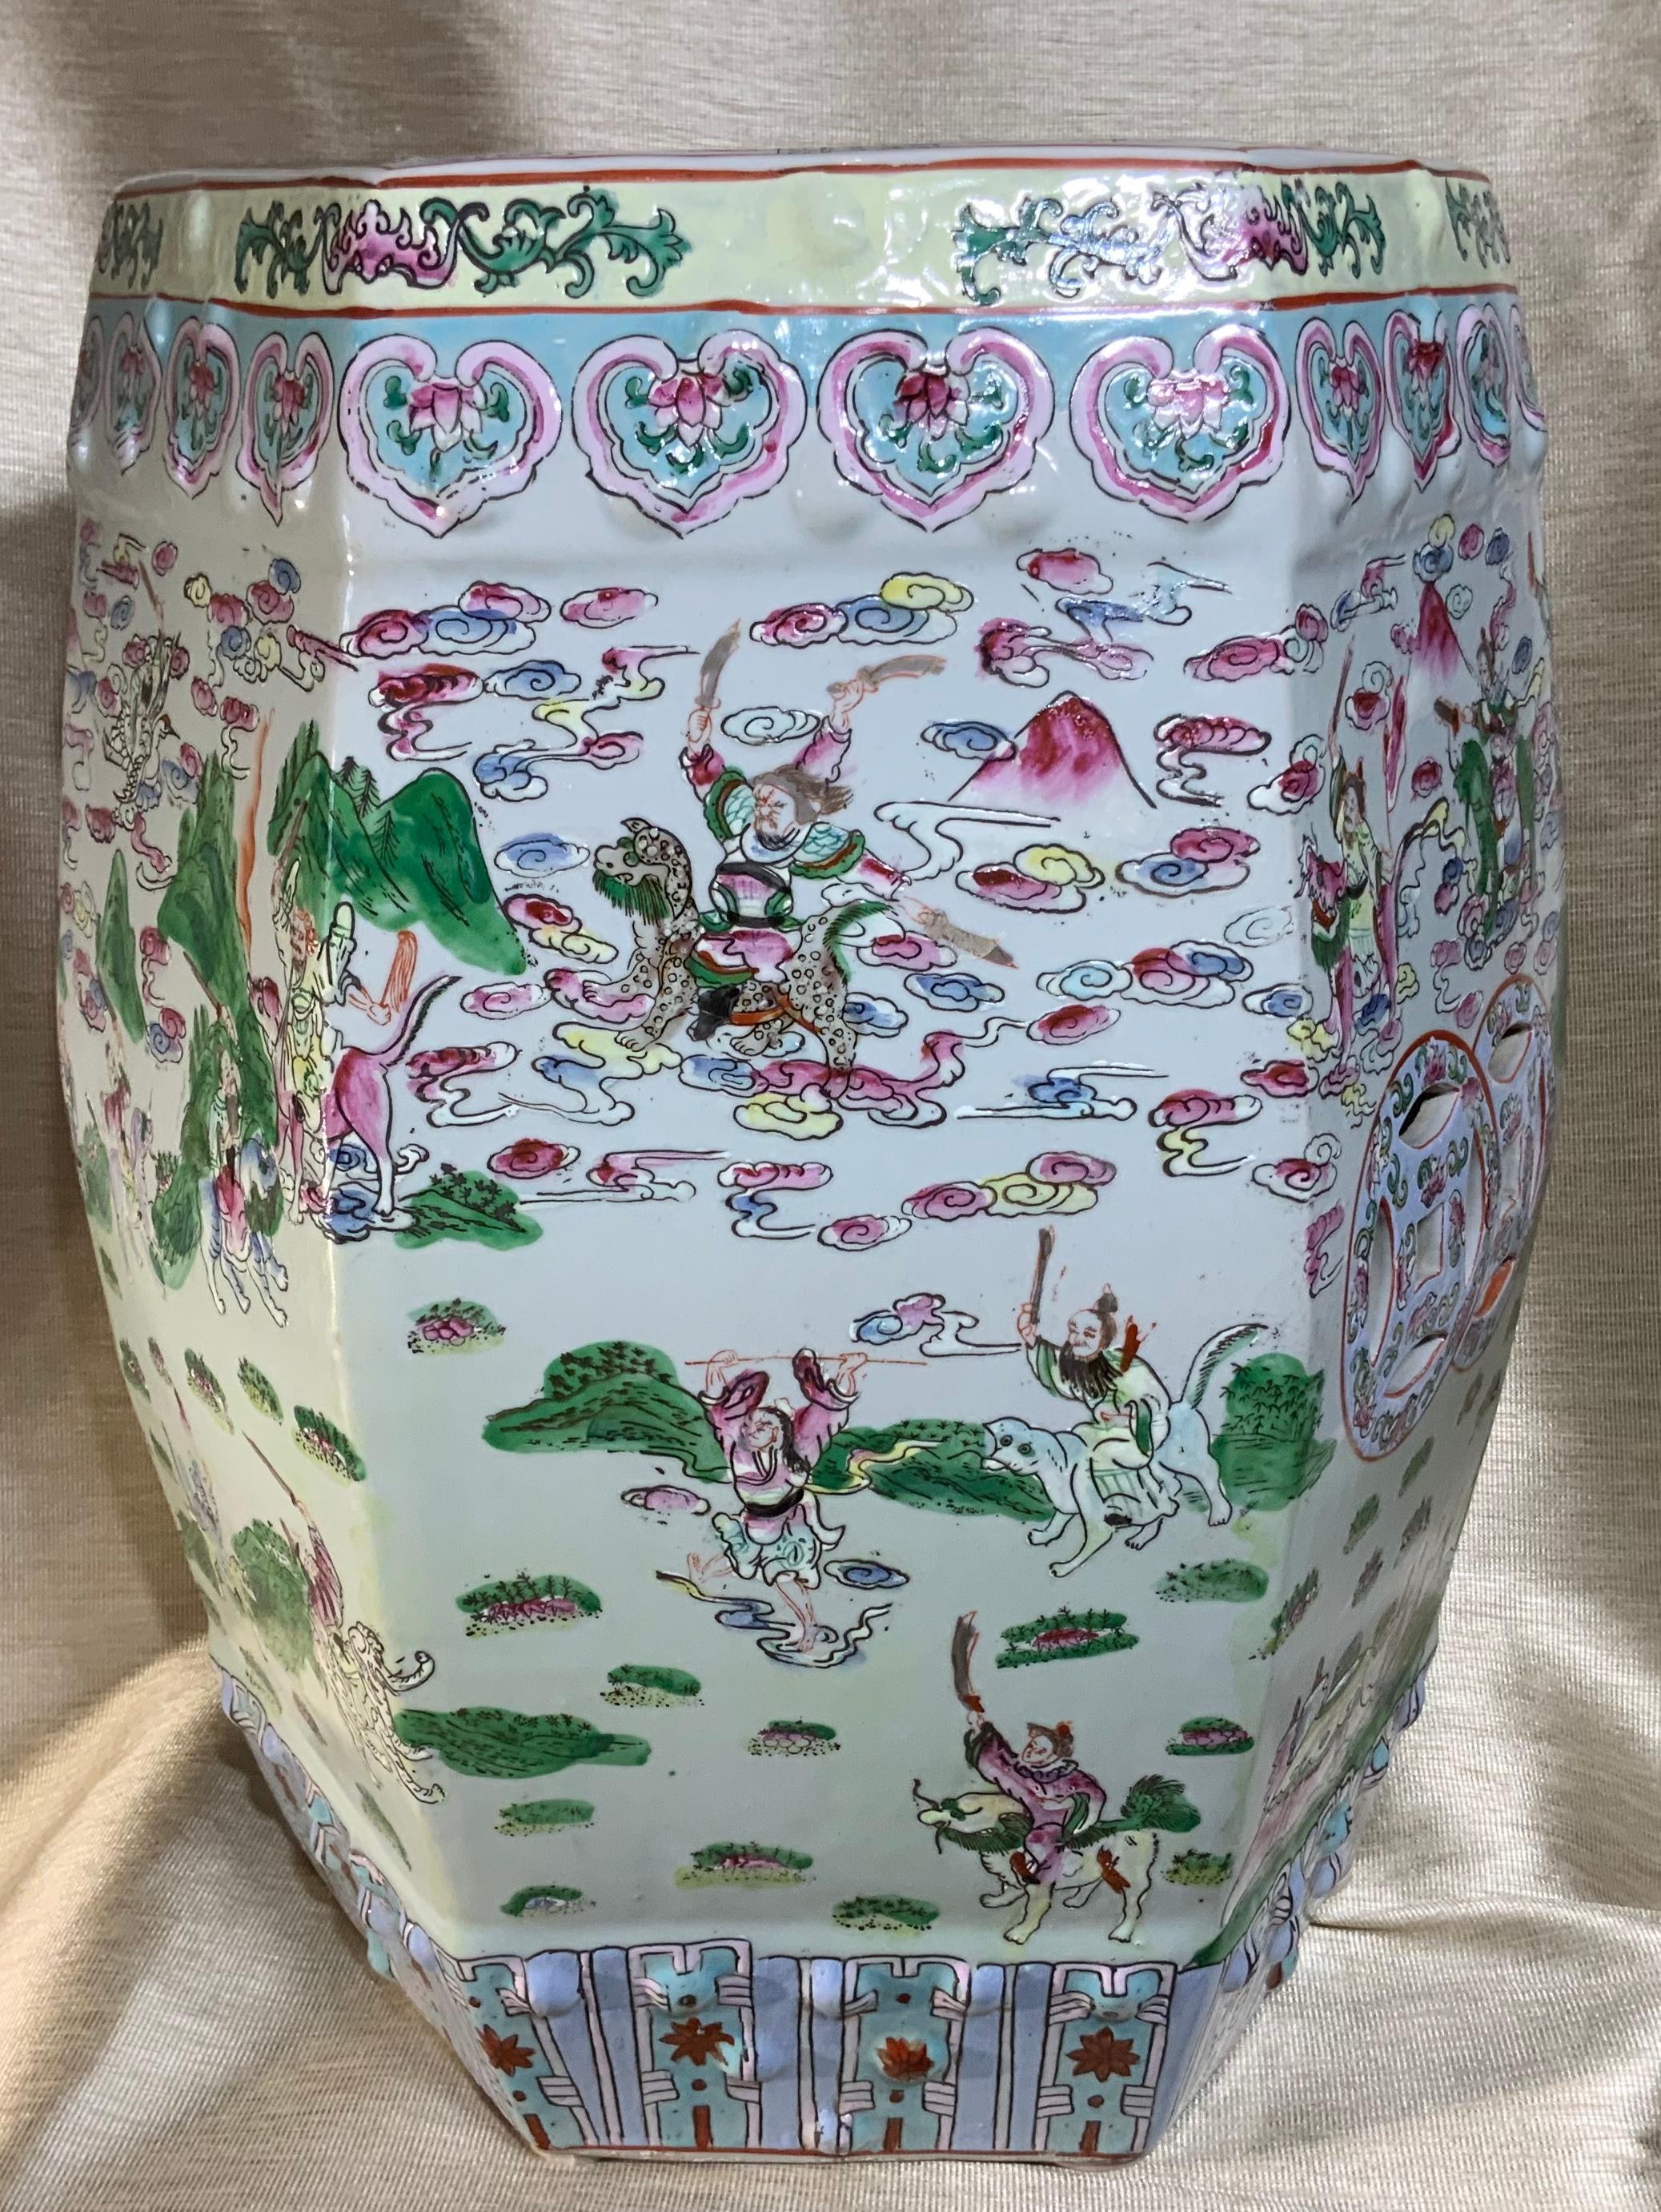 Beautiful Chinese porcelain garden stool of traditional drum shape, stunning colors of light blue lime, light turquoise and green of Chinese scenery of war, garden and landscapes. All around at six sides. The top is with cutout of a single Chinese